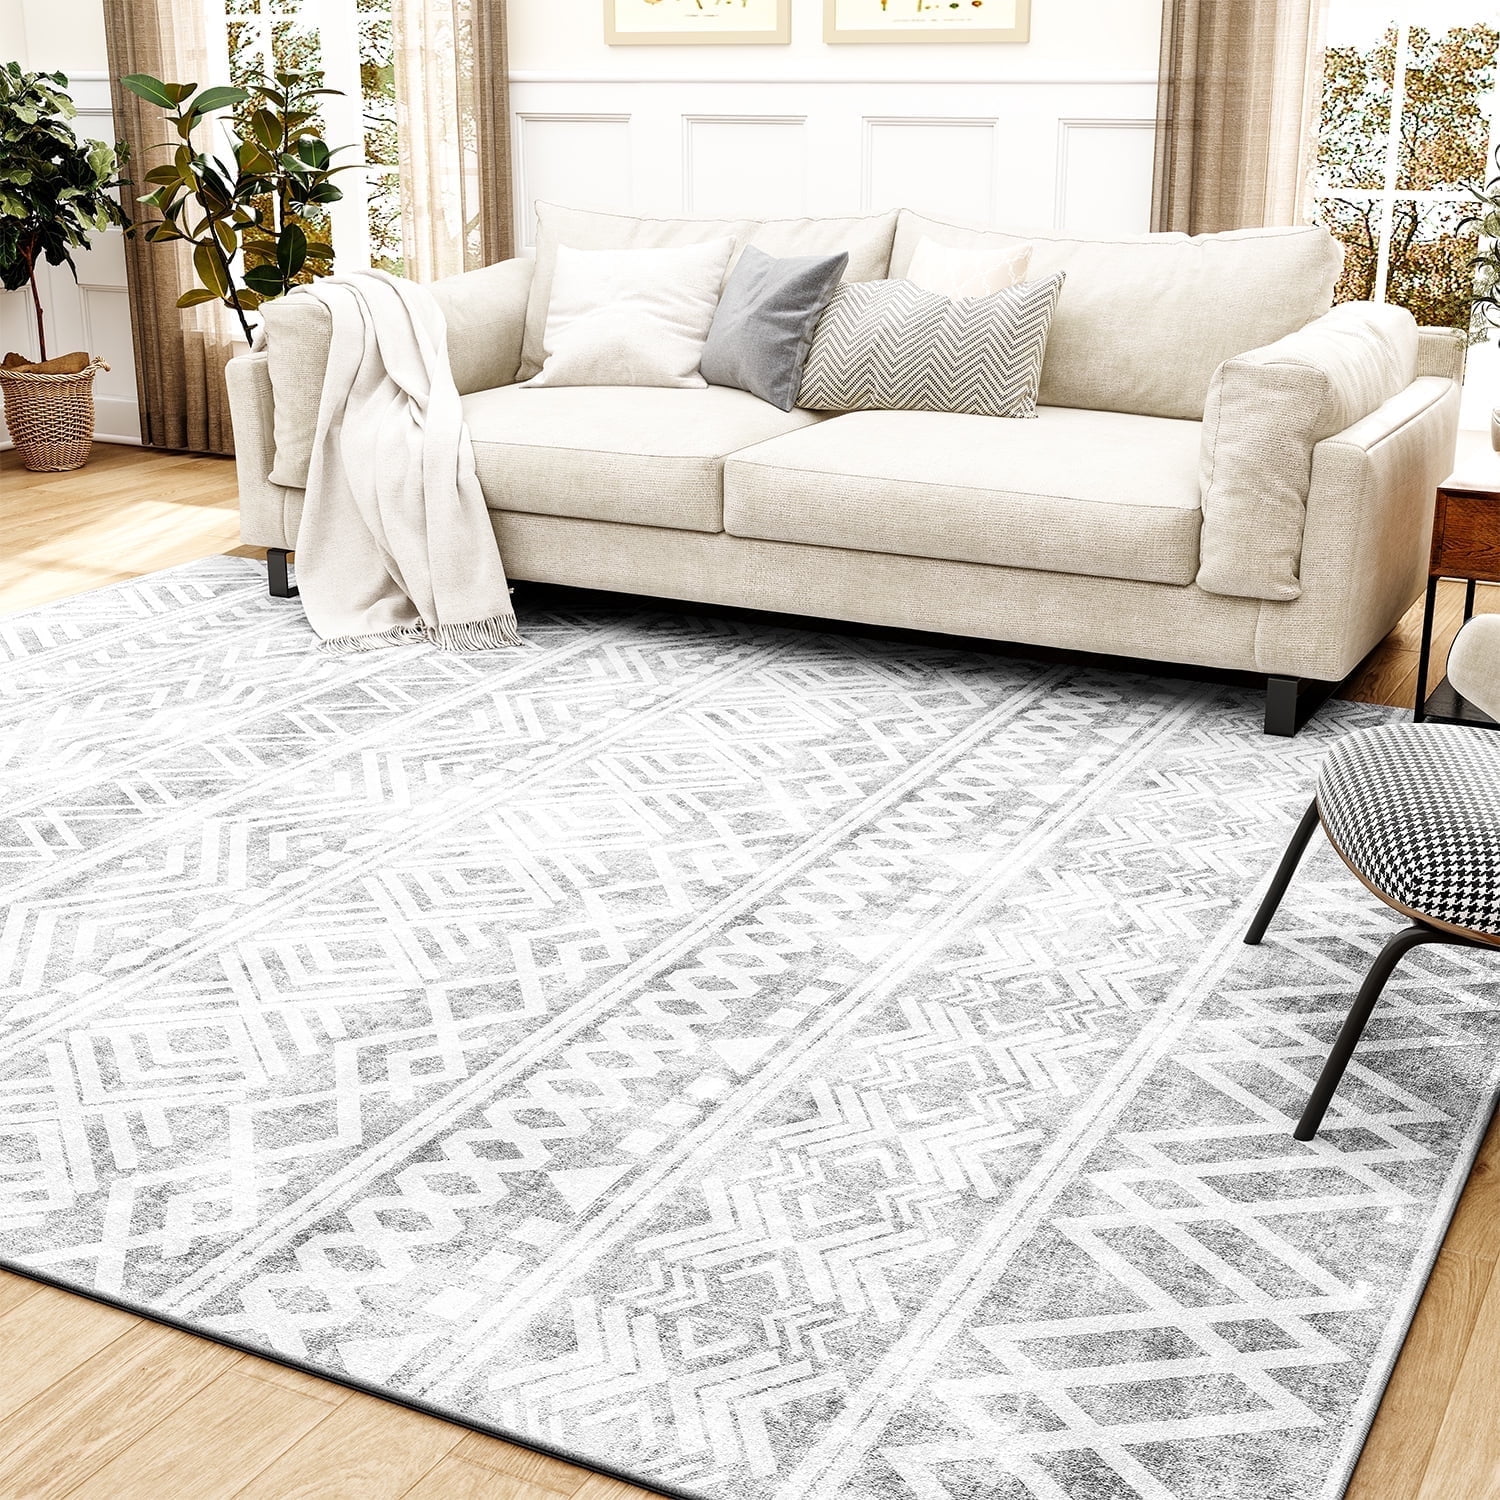 Sixhome 5 X7 Area Rugs For Living Room Washable Boho Large Rug Modern Geometric Neutral Carpet And Home Decor Foldable Non Slip Bedroom Gray Com